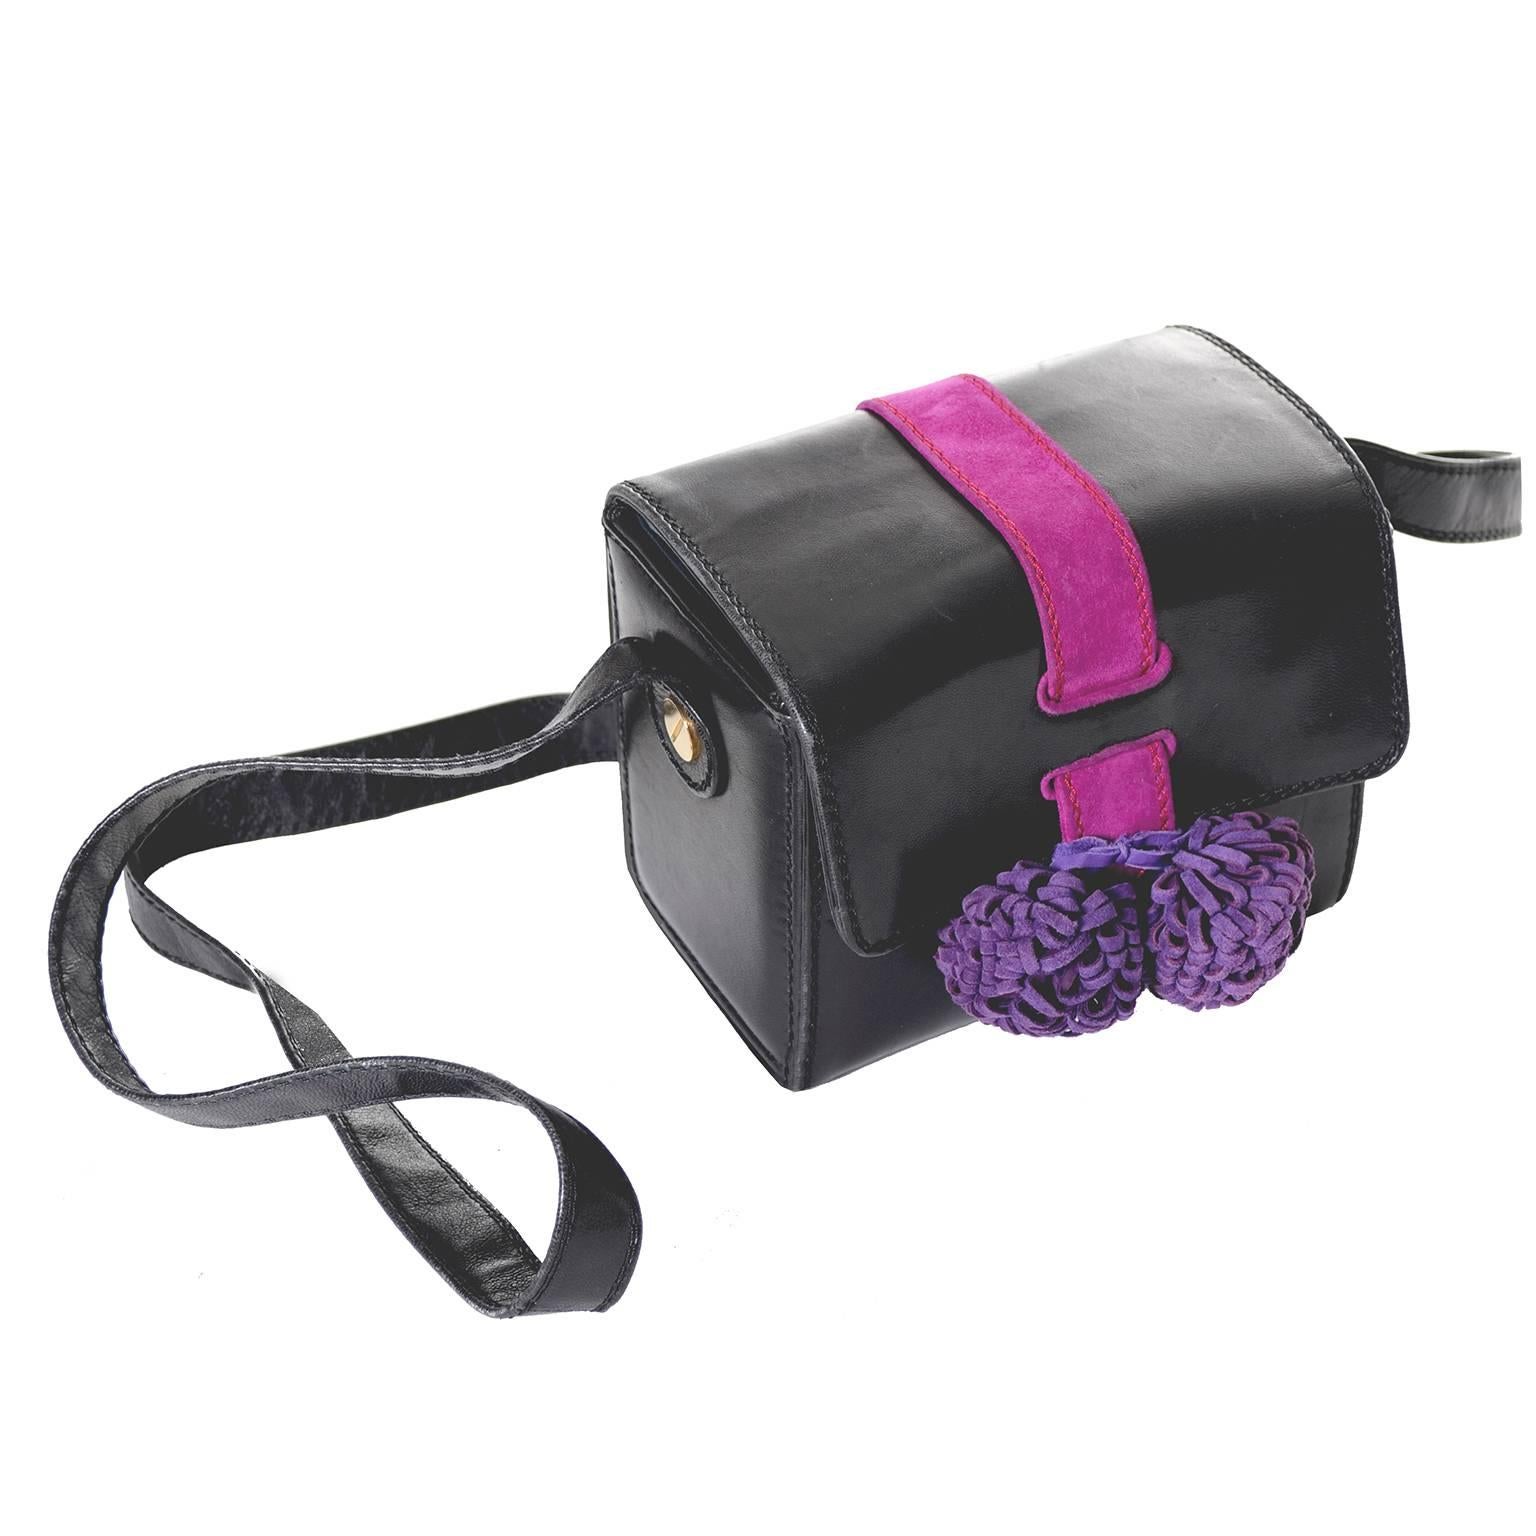 This is a rare style vintage handbag from designer Maud Frizon.  The bag has shoulder straps and is made of black leather with fuchsia suede trim and fab purple pom poms. This 1980s Maud Frizon Handbag is from an estate I recently acquired that